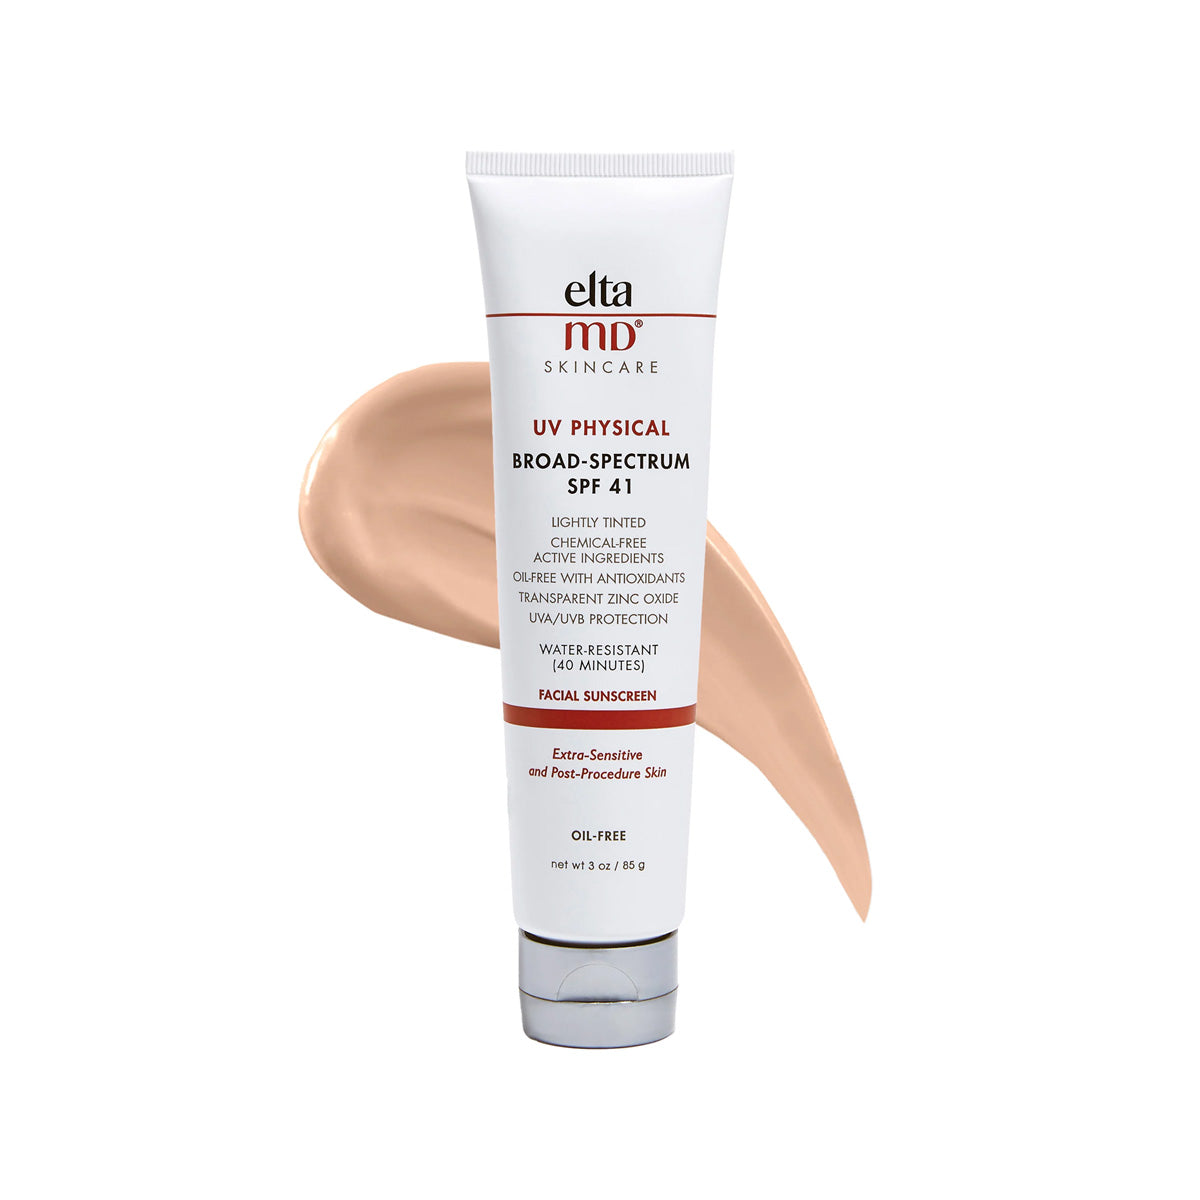 Elta MD UV Physical Tinted Broad-Spectrum Sunscreen SPF 41